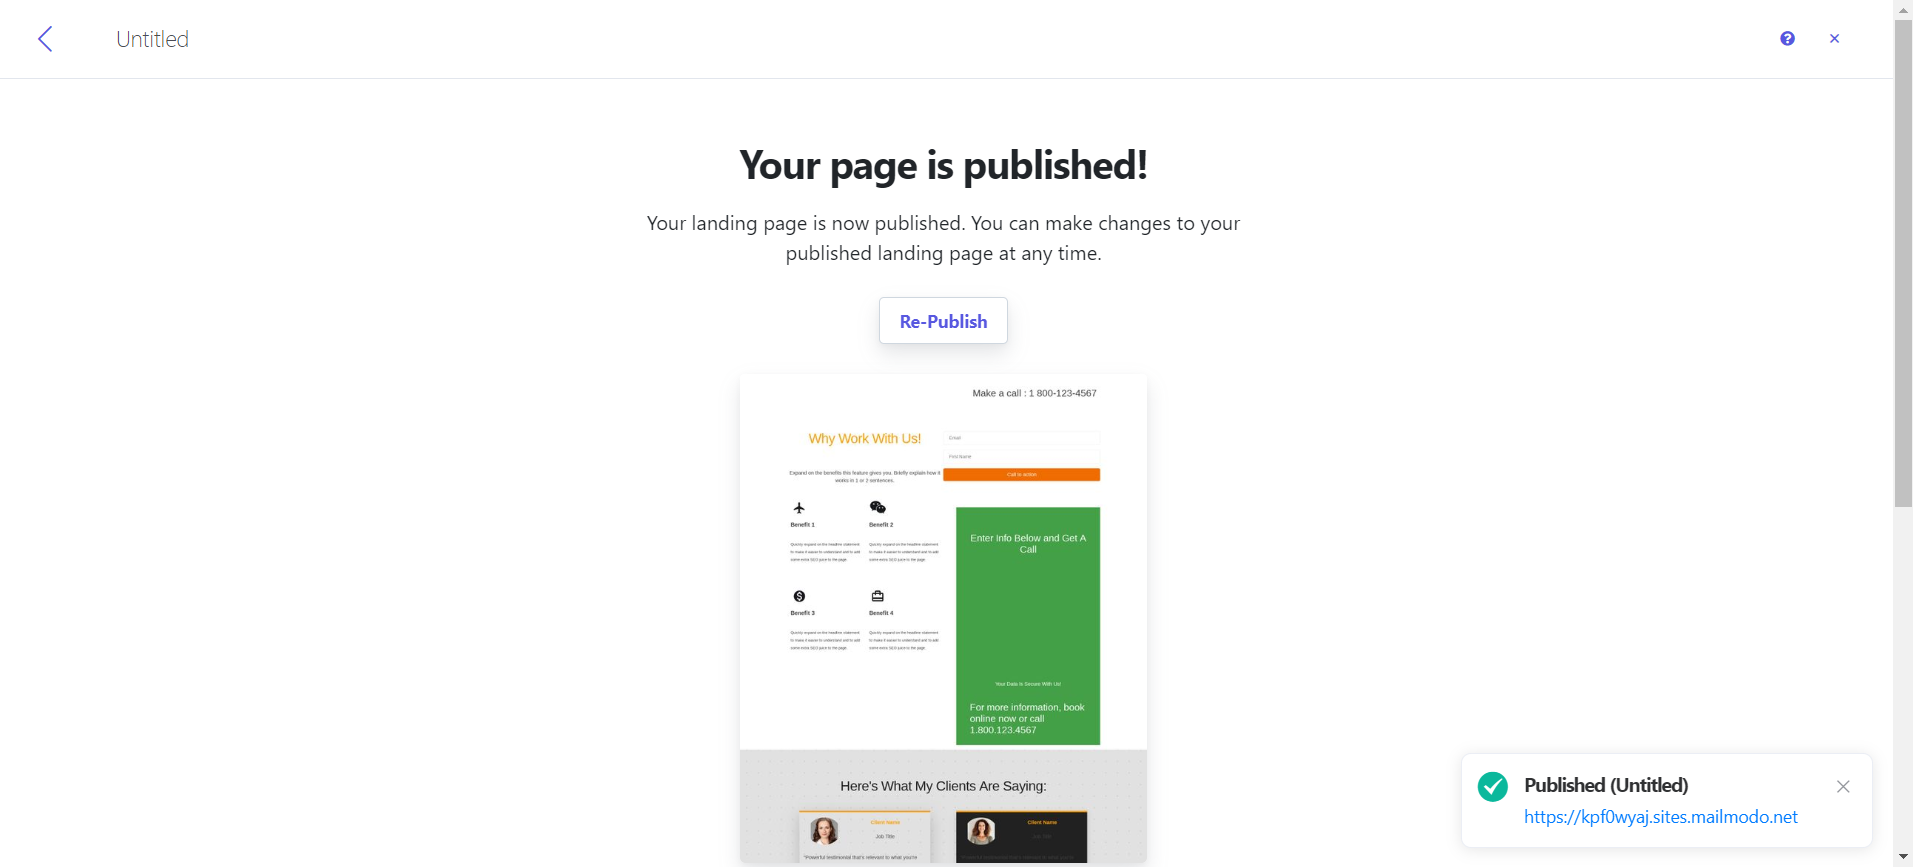 Launching Your Landing Page